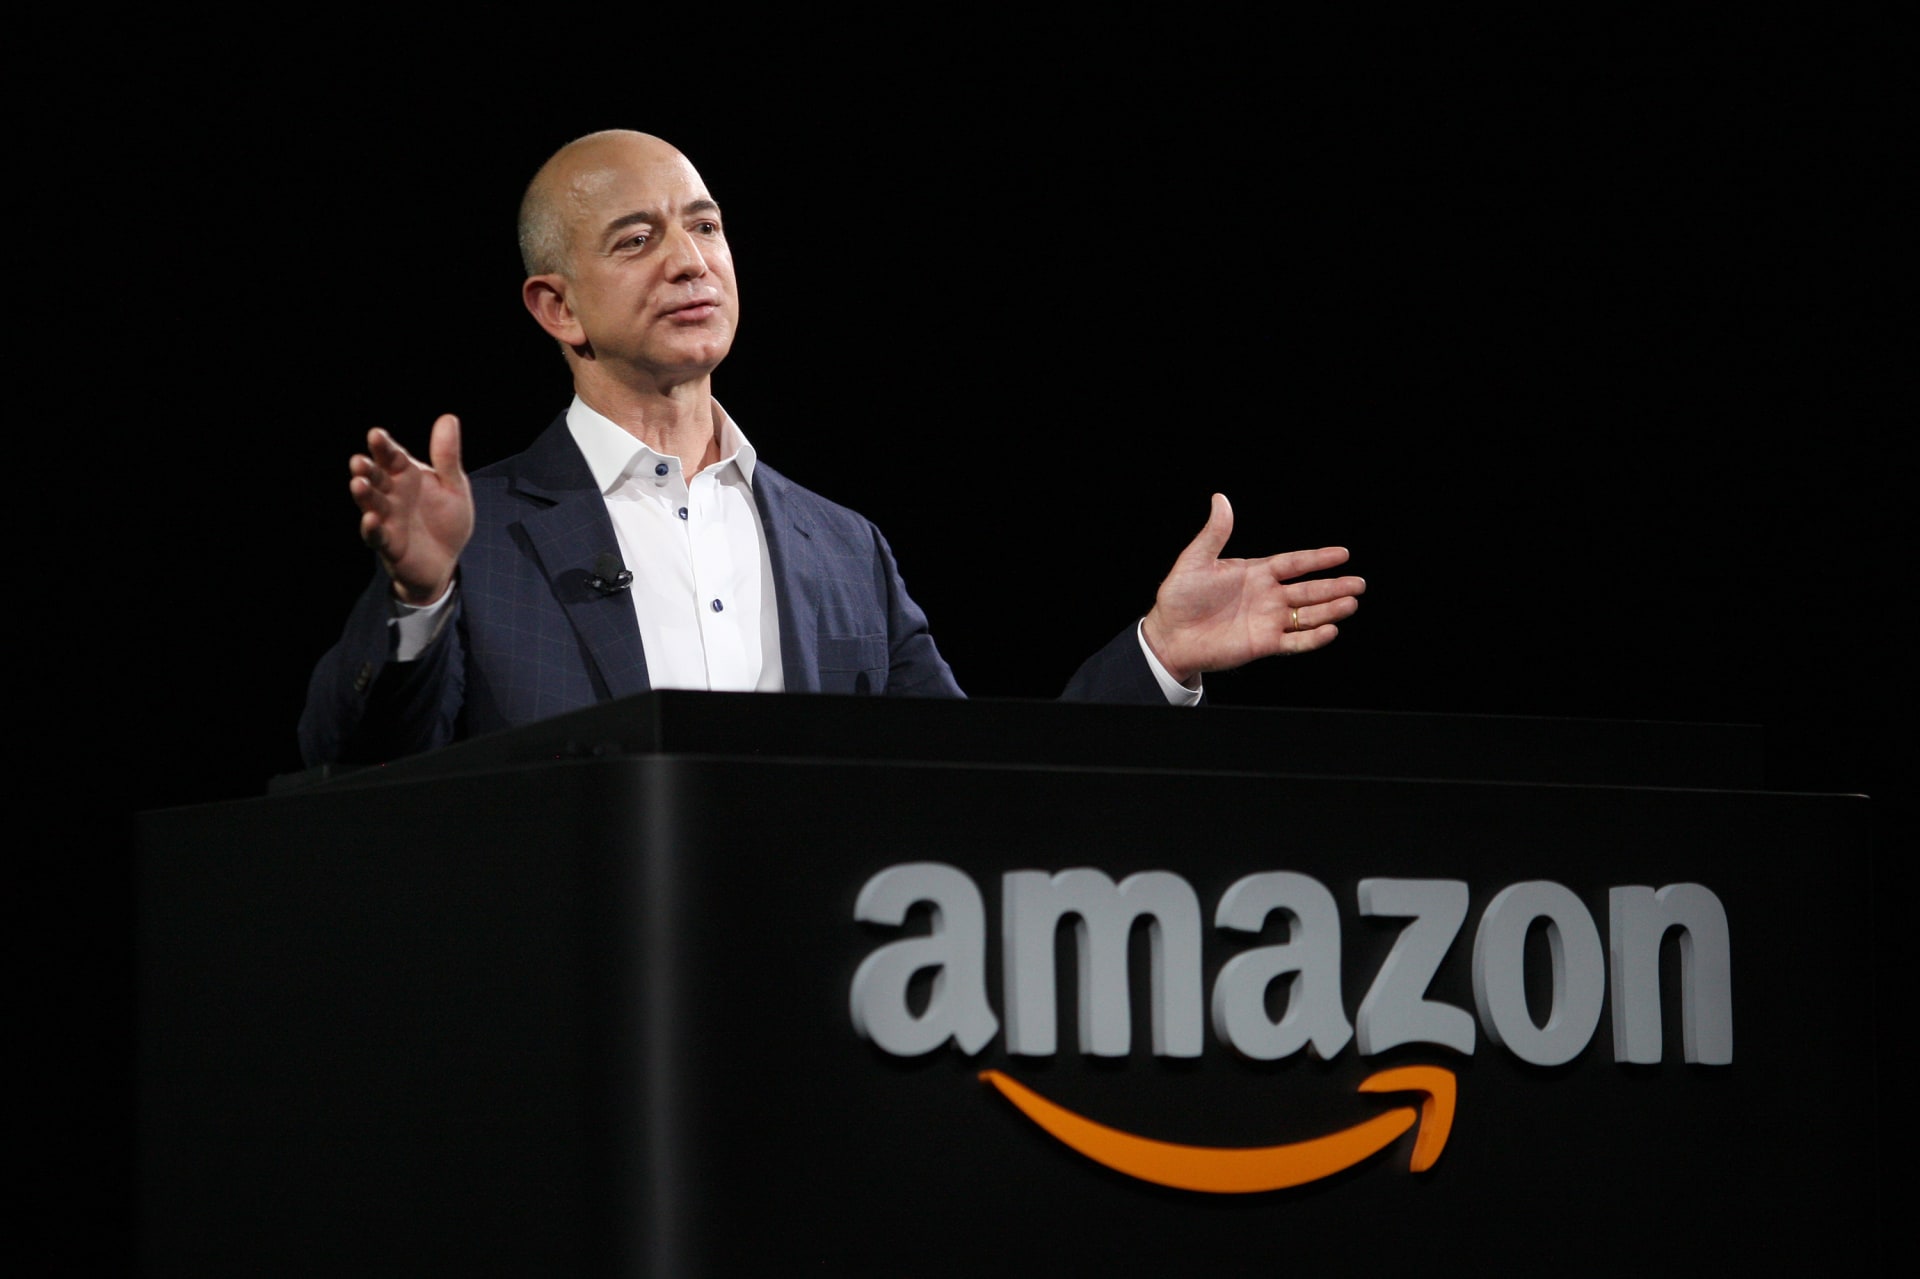 Bezos and other billionaires warn of recession and 'next economic crisis' 224409